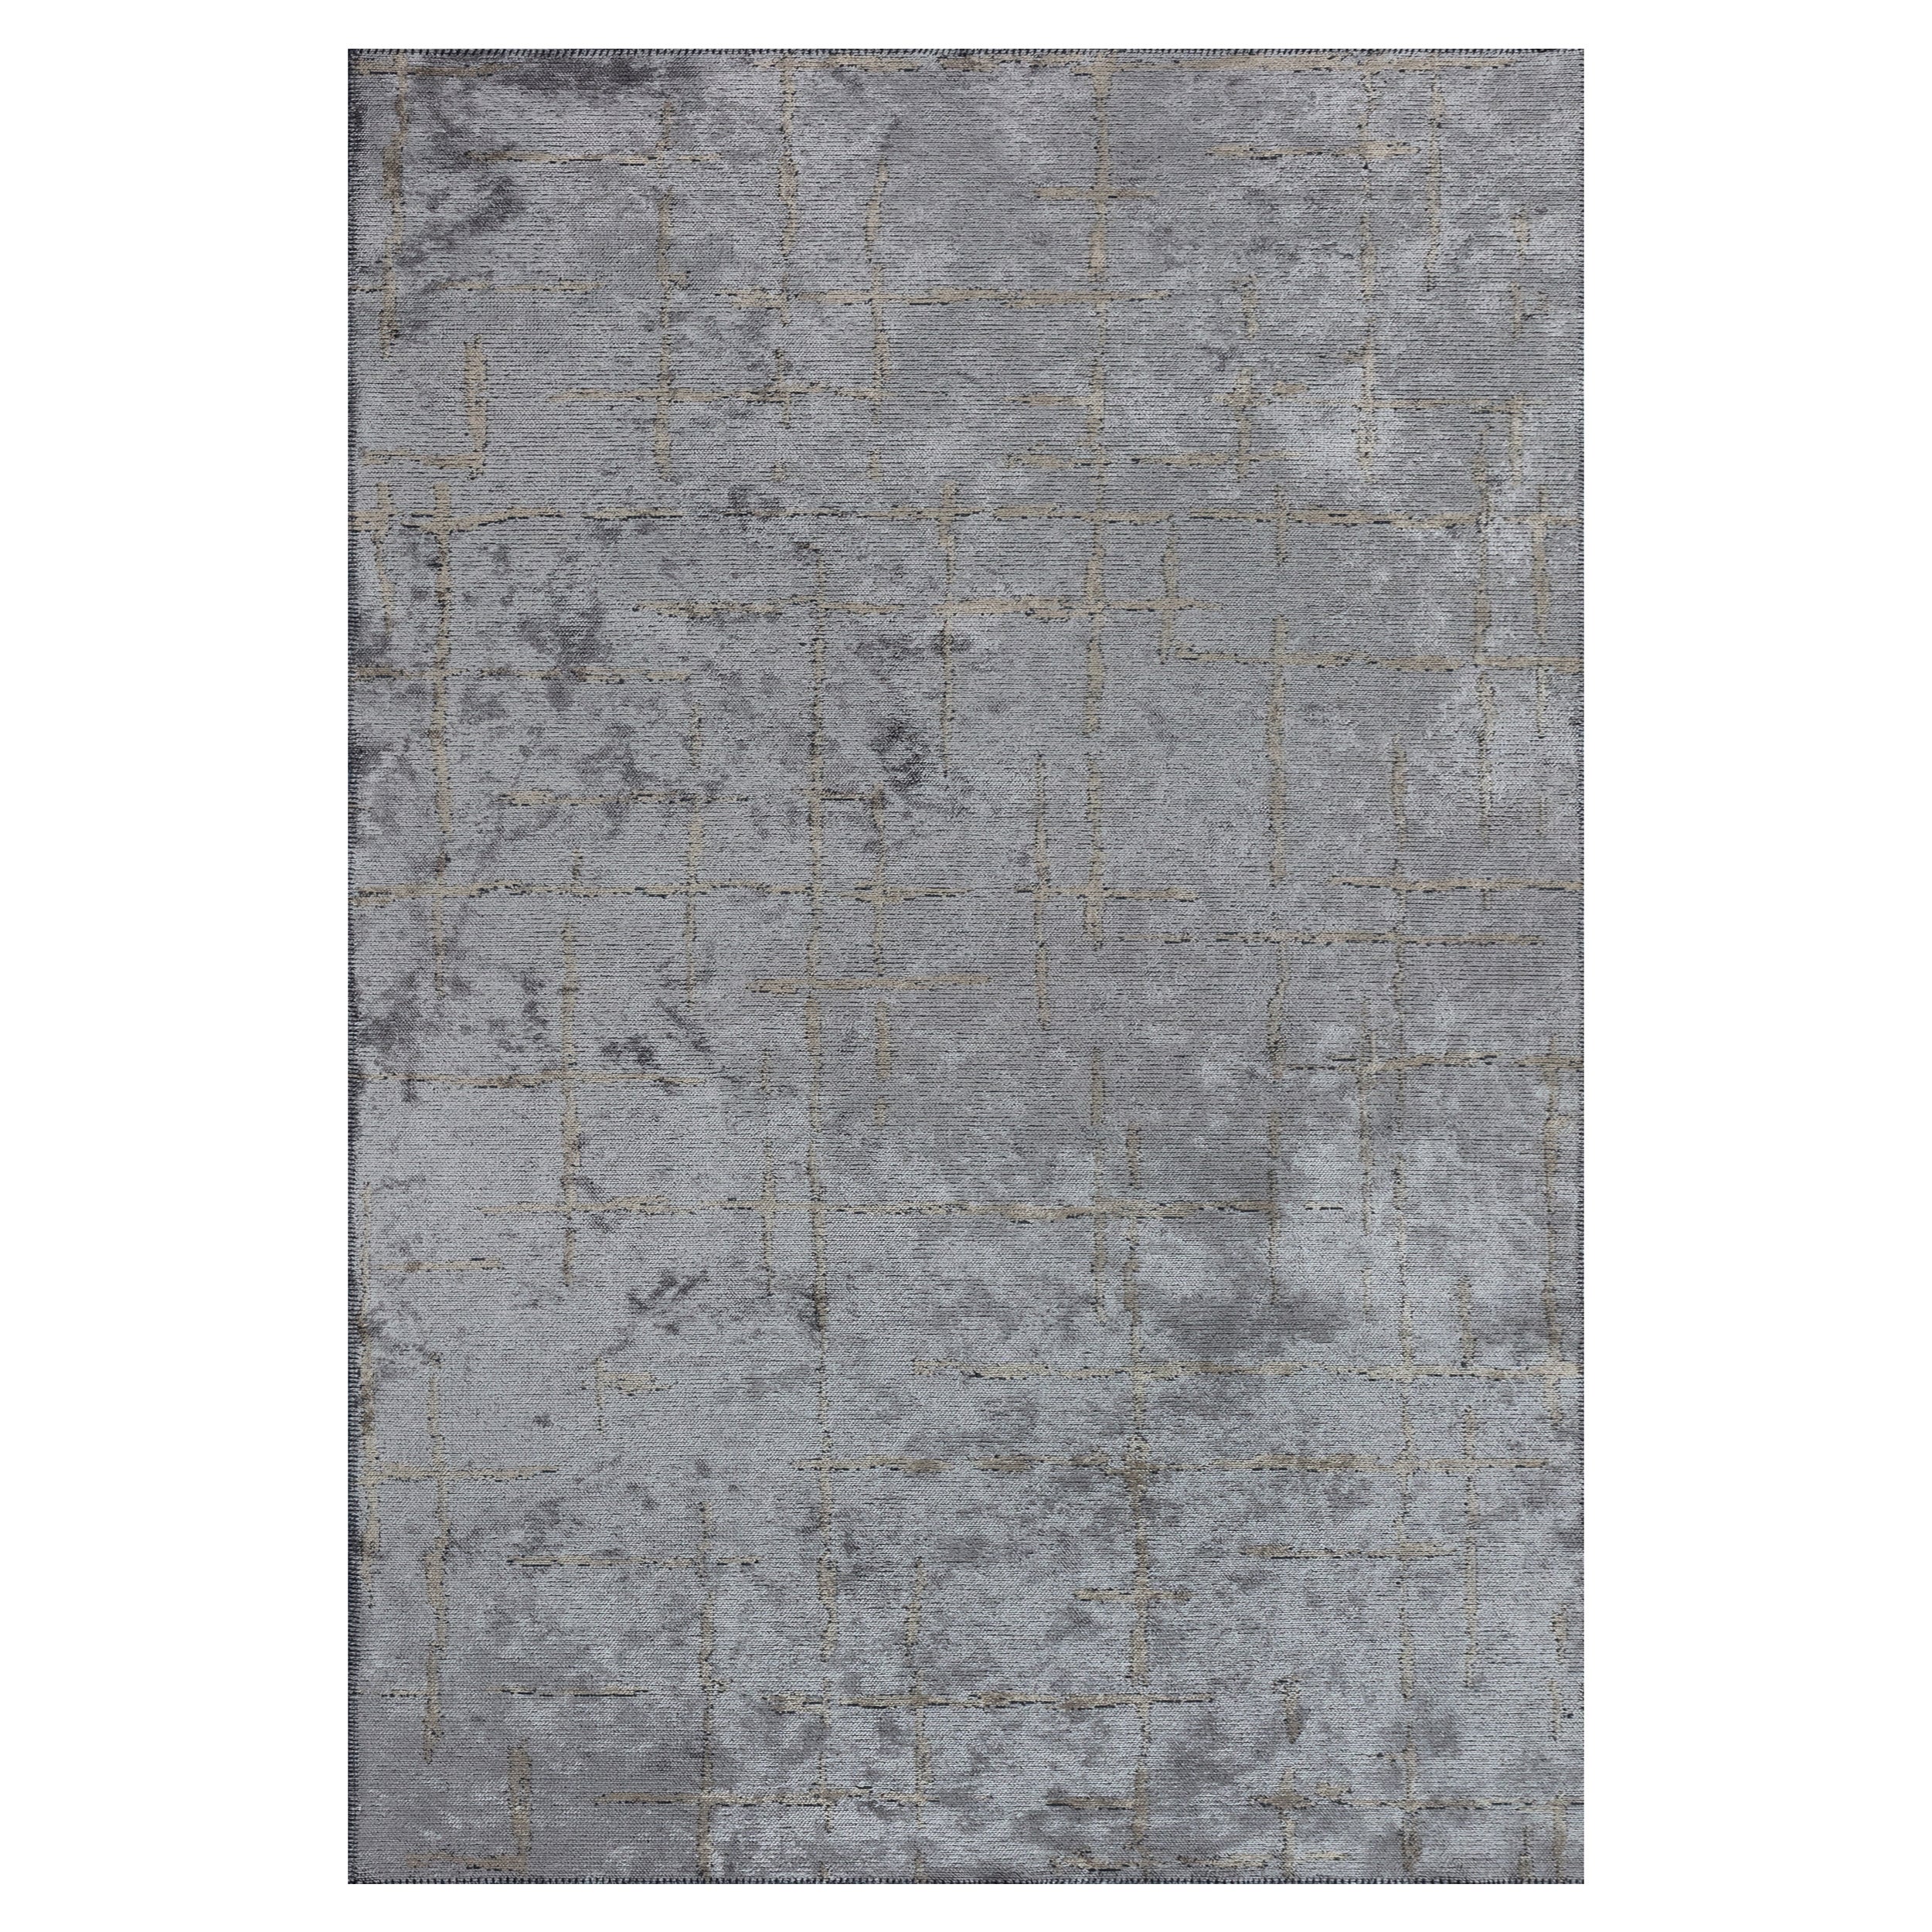 Modernist Silver Gray Beige 5x6'6" Area Rug in Stock